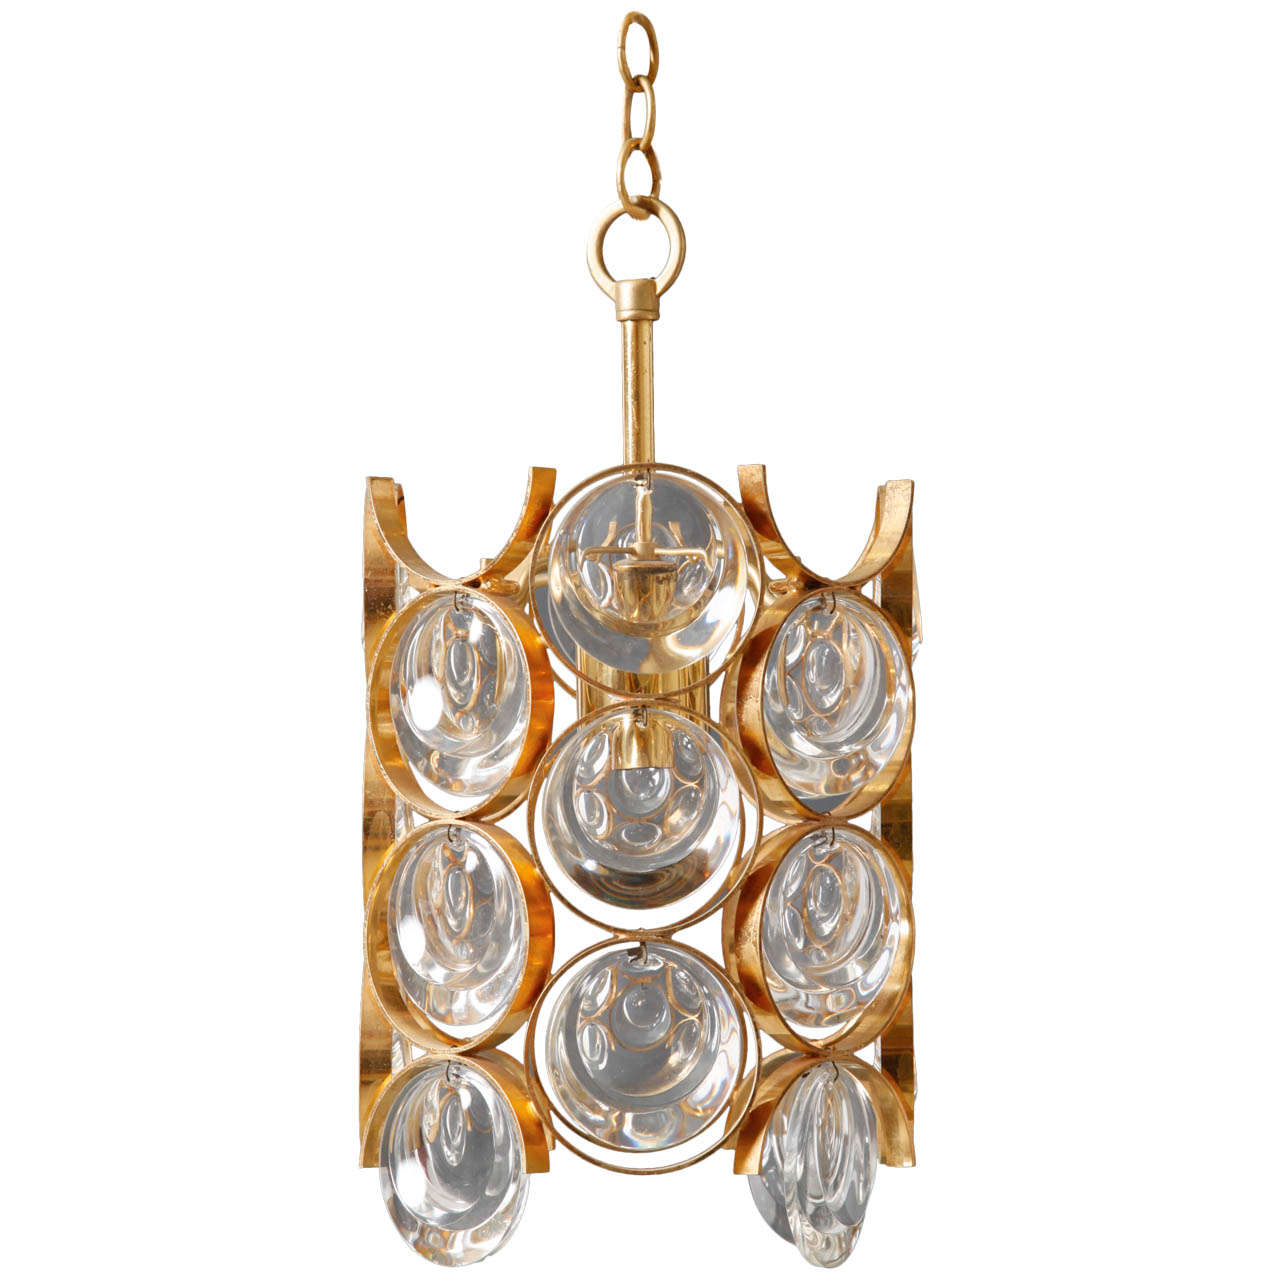  Stunning Chandelier by Palwa